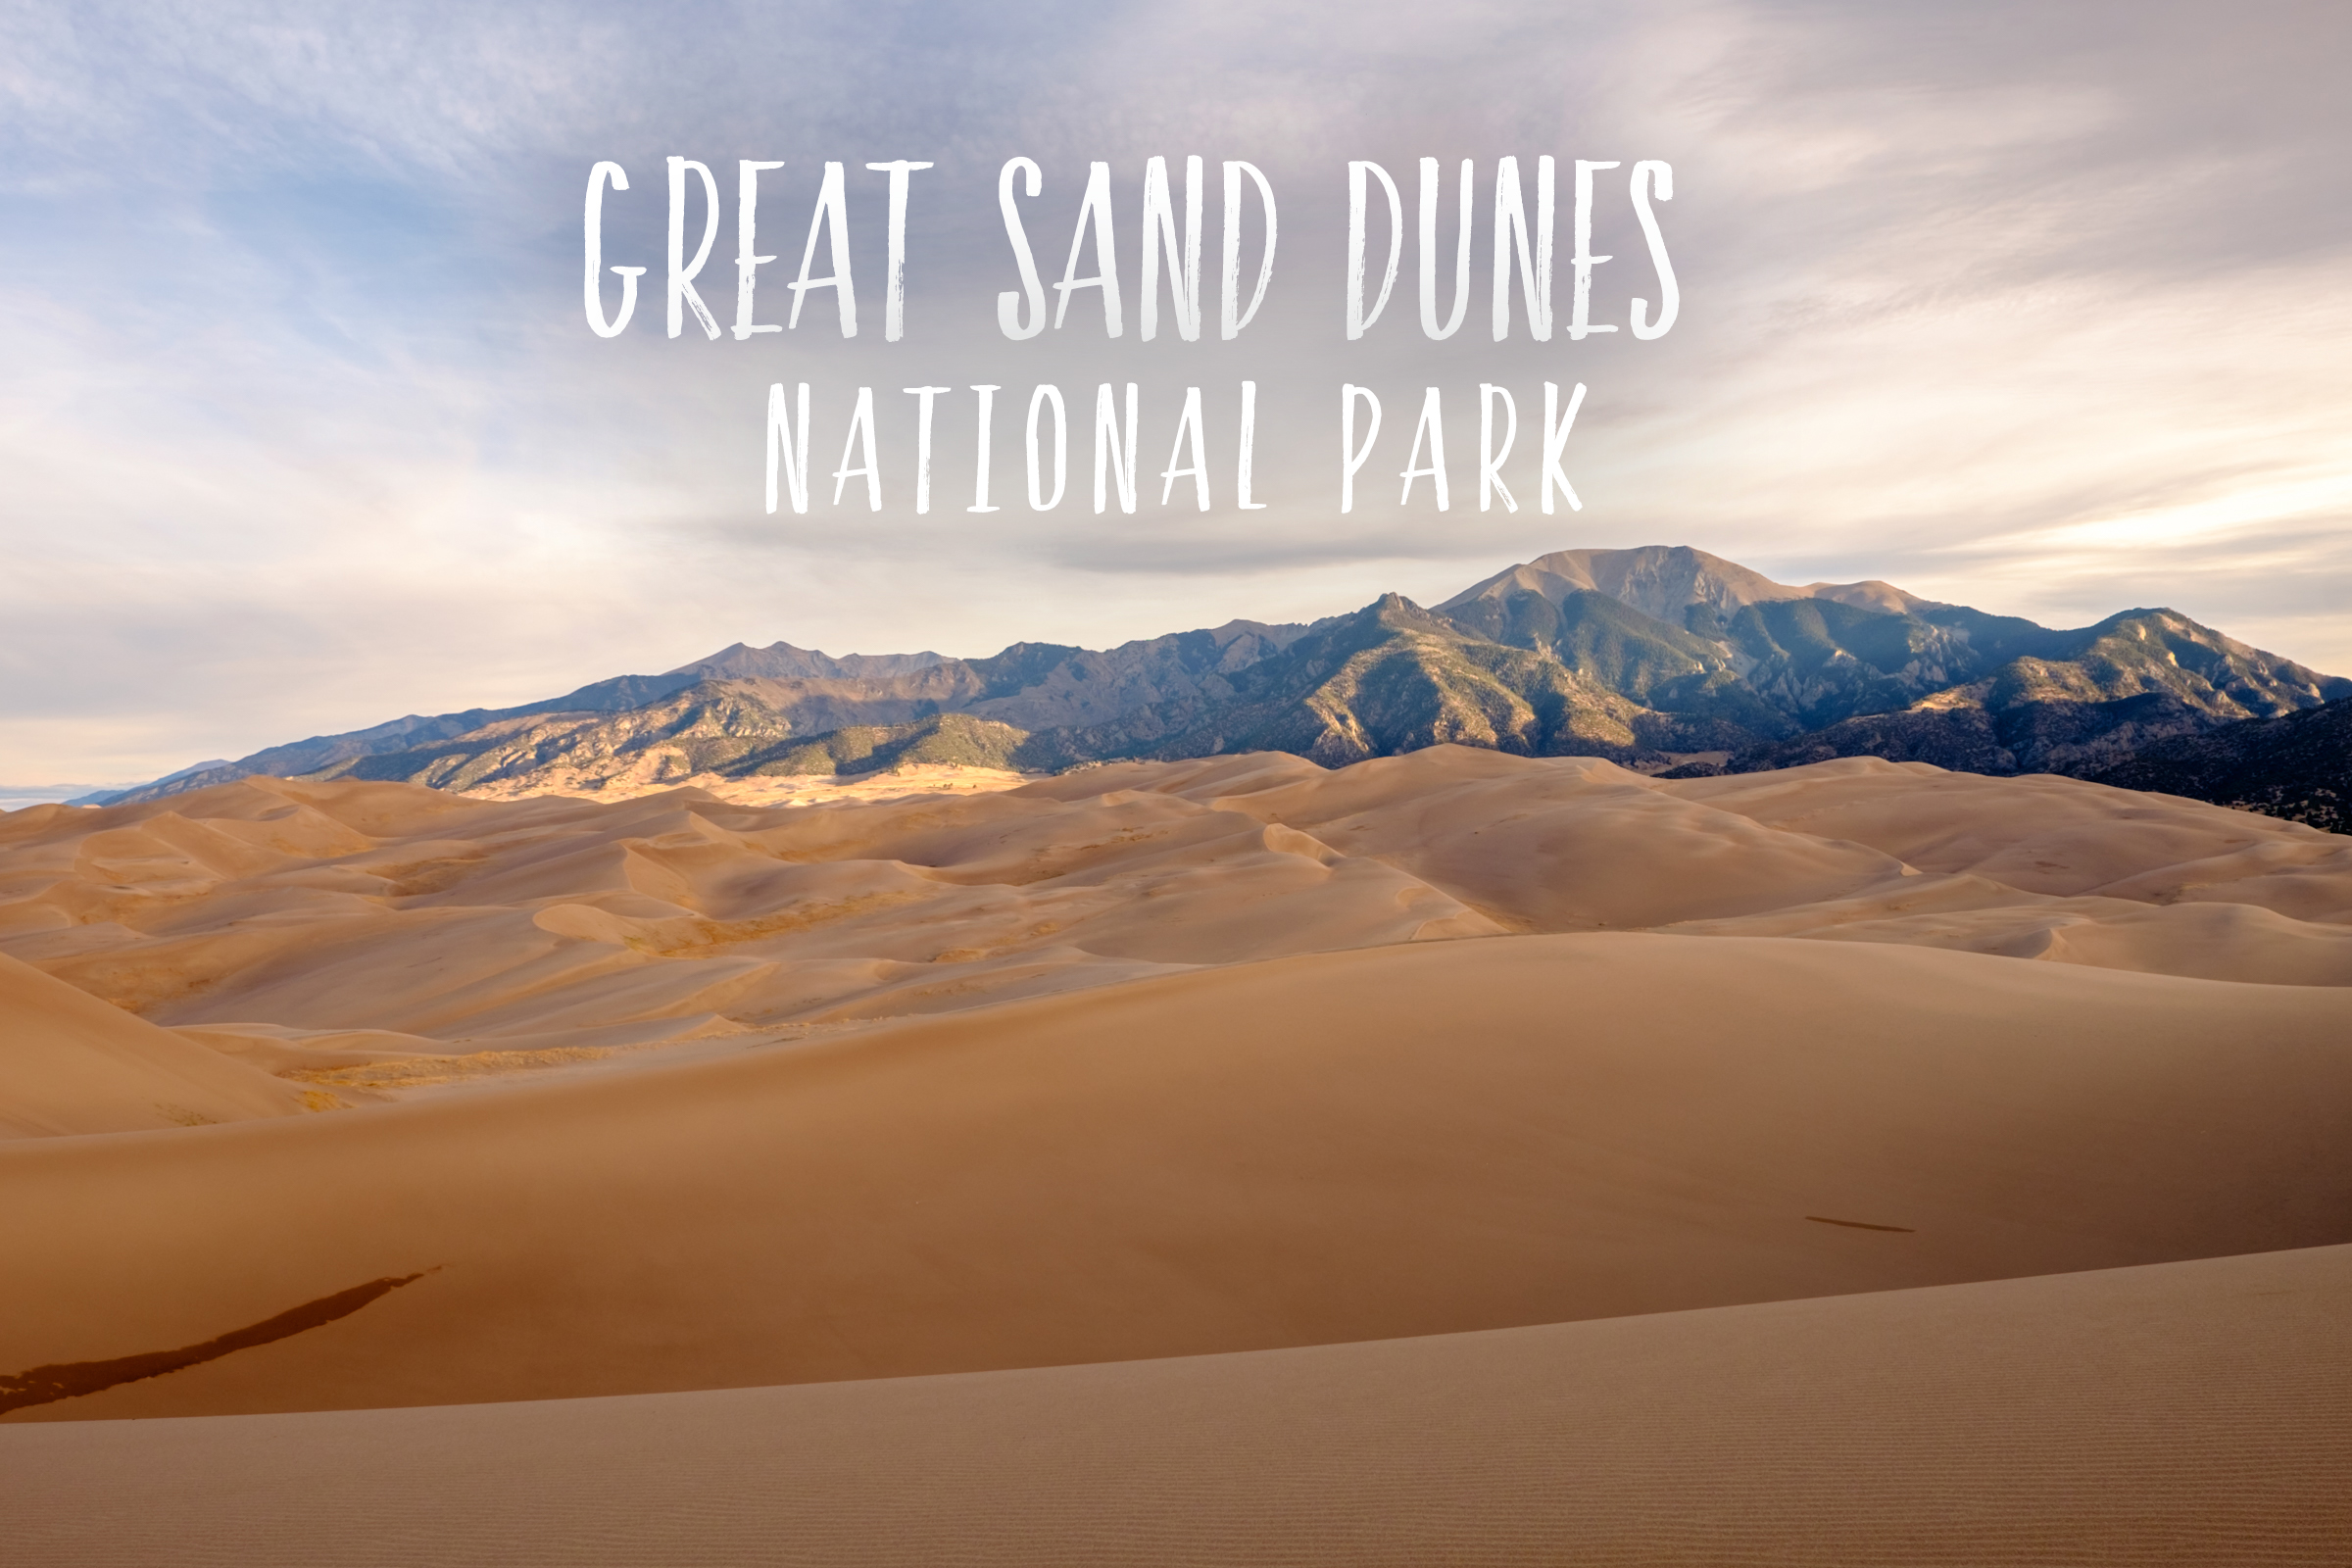 Park 47/59: Great Sand Dunes National Park in Colorado